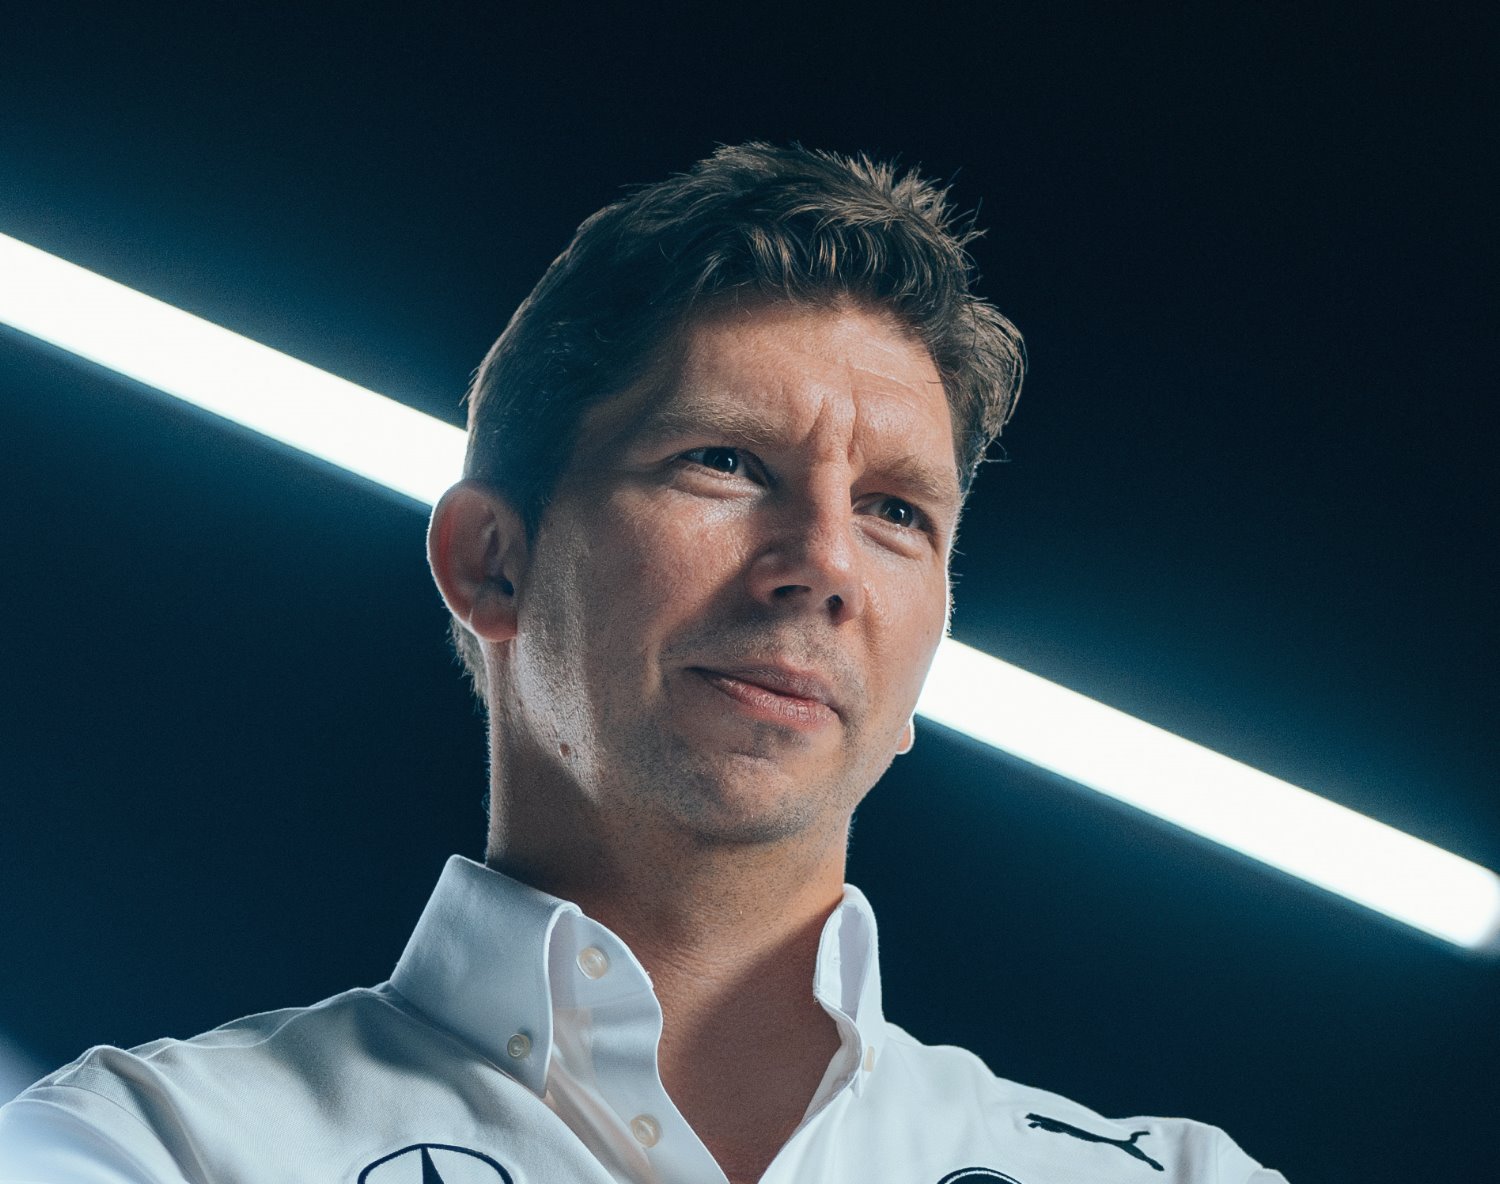 Williams F1 Team Boss James Vowles. Photo Supplied by Williams F1 Team